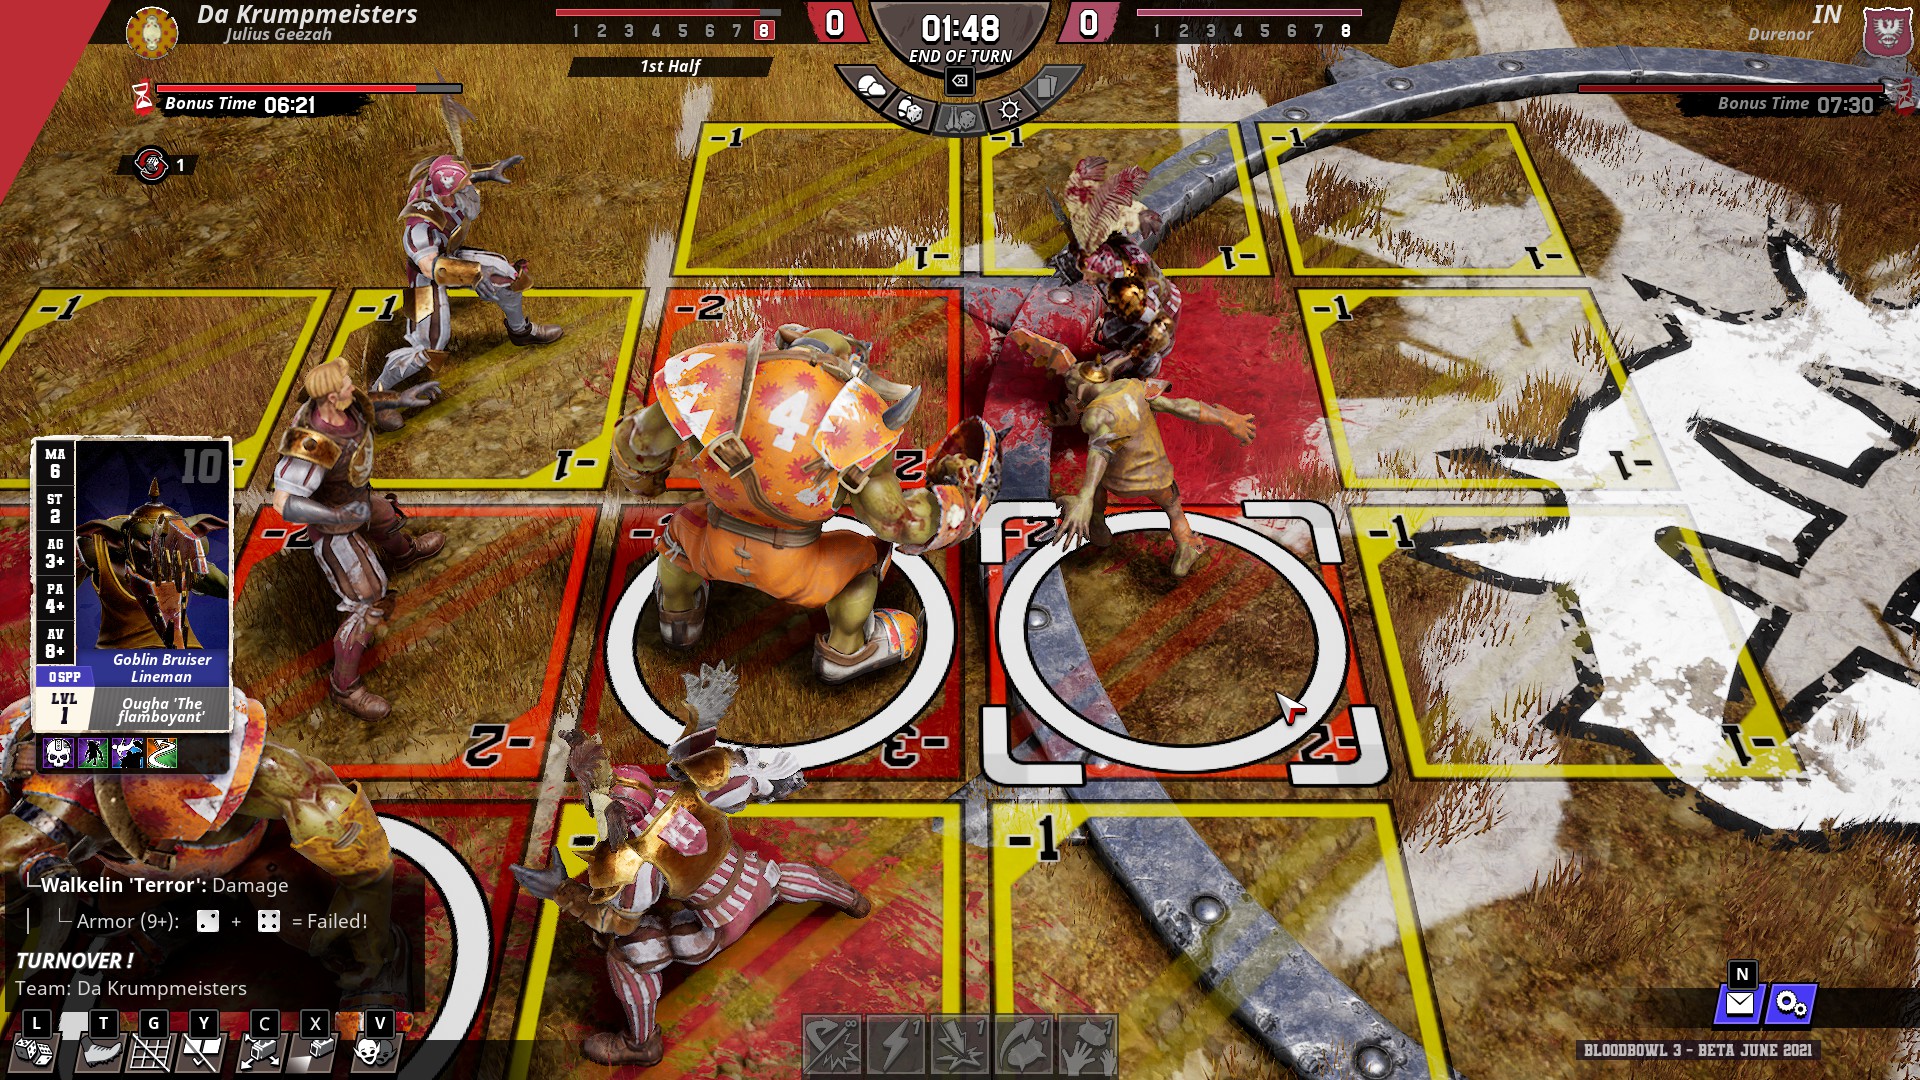 Blood Bowl 3 Gives Us New Rules And New Limbs To Break